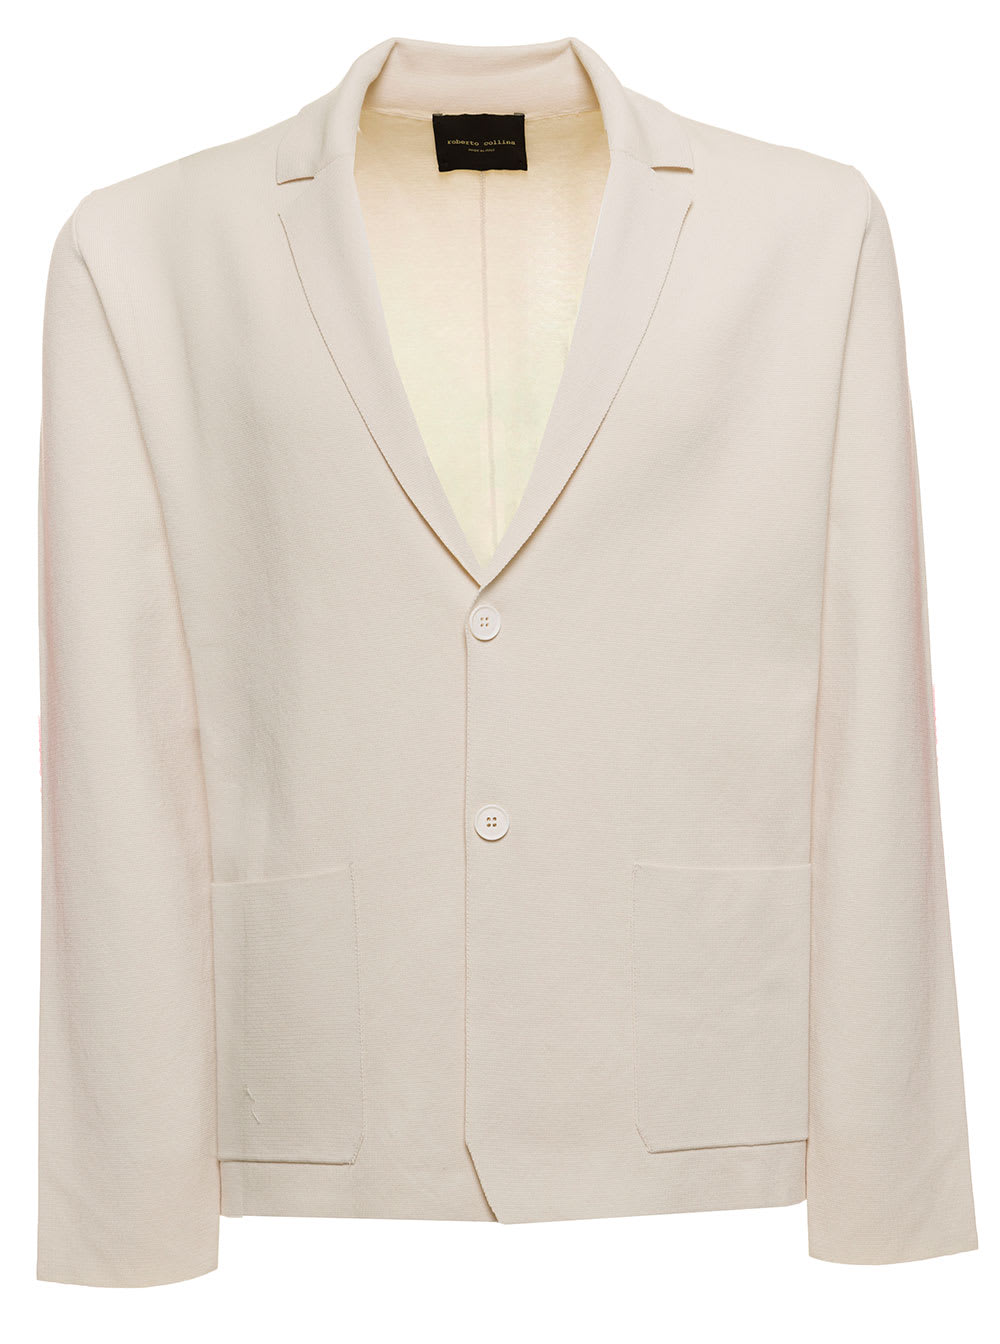 Roberto Collina Womans Ivory Colored Cotton Single-breasted Jacket